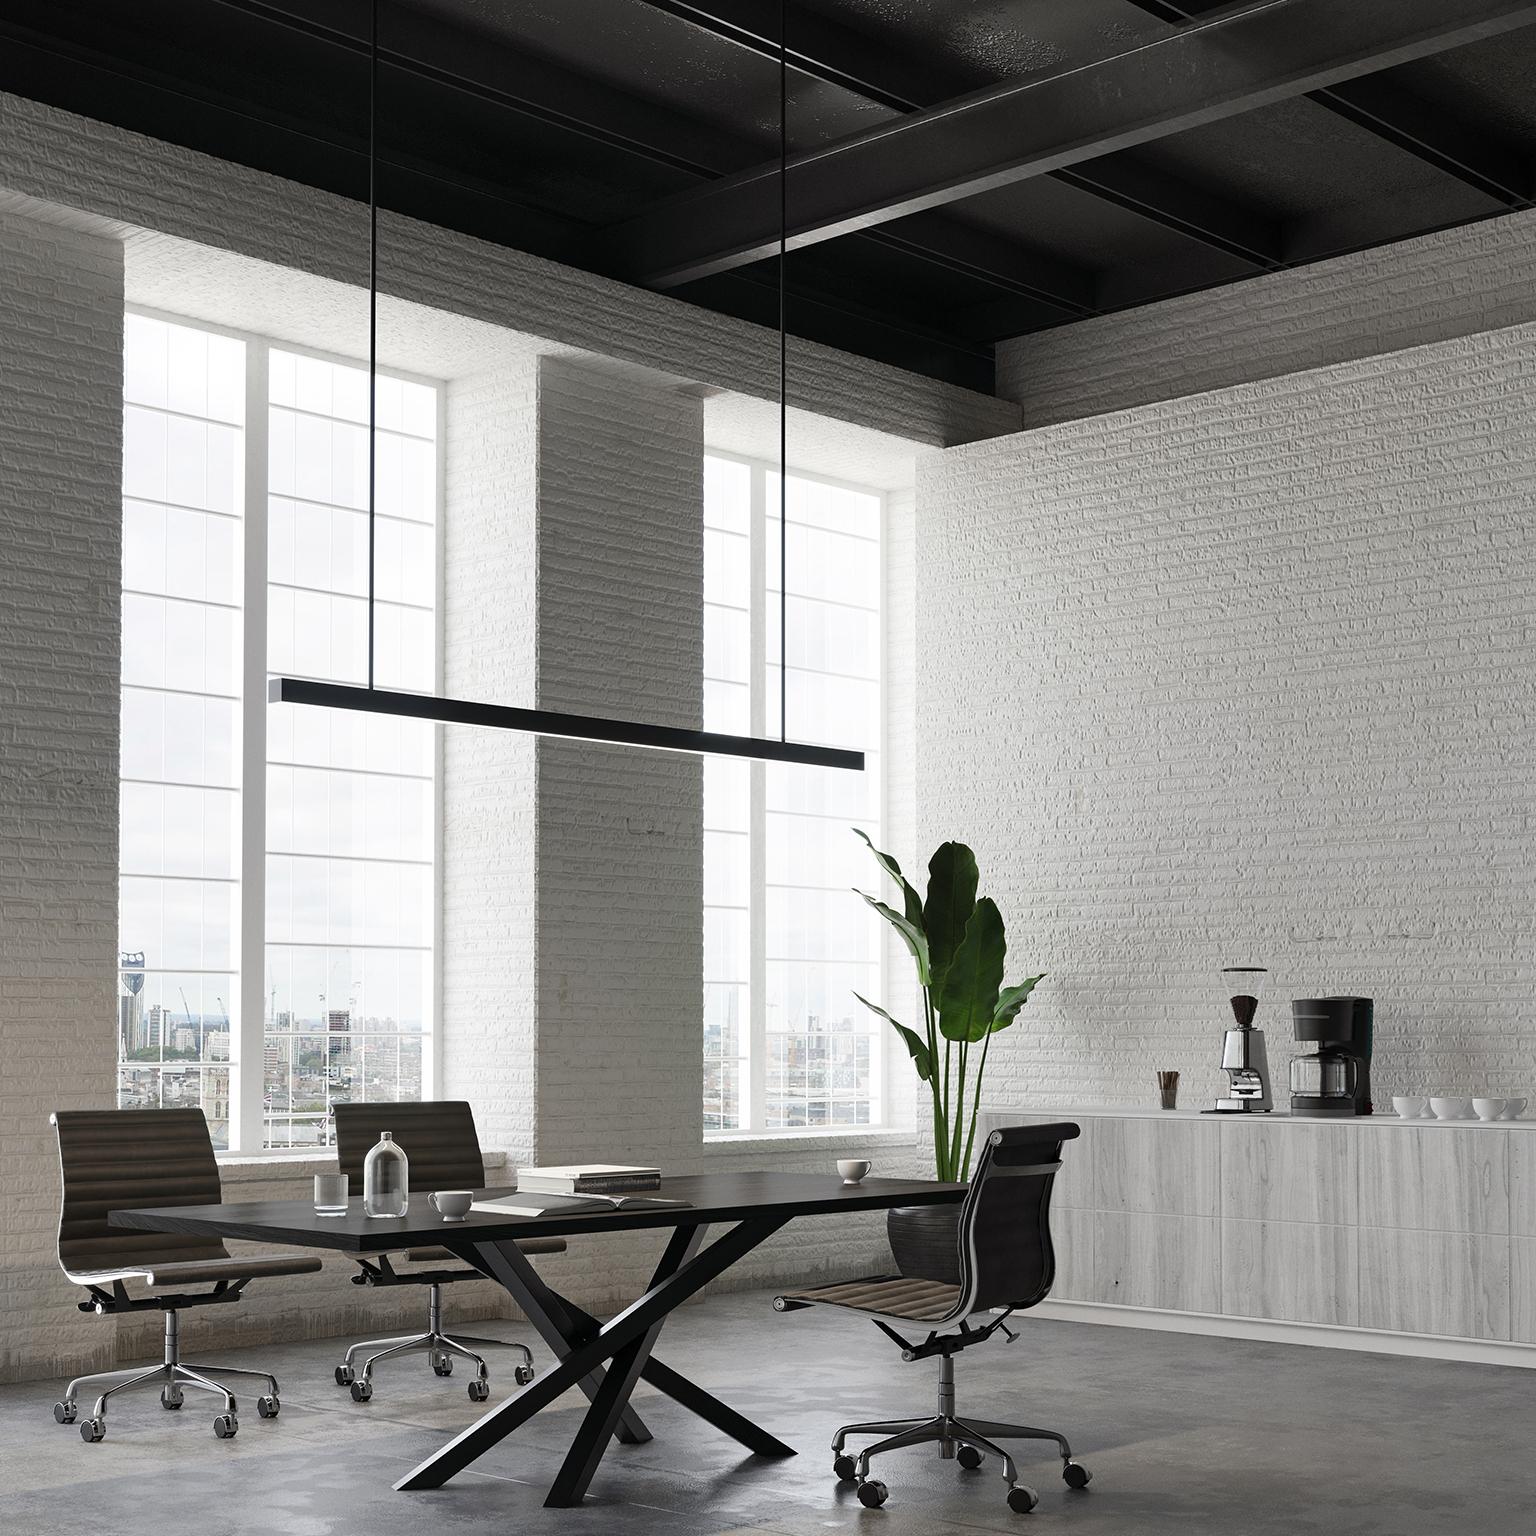 Two things that make a great meeting table are versatility and style. This modern meeting table has both in spades: efficient and flexible seating around a beautiful sculptural pedestal base.

The biggest draw of a pedestal meeting table is the